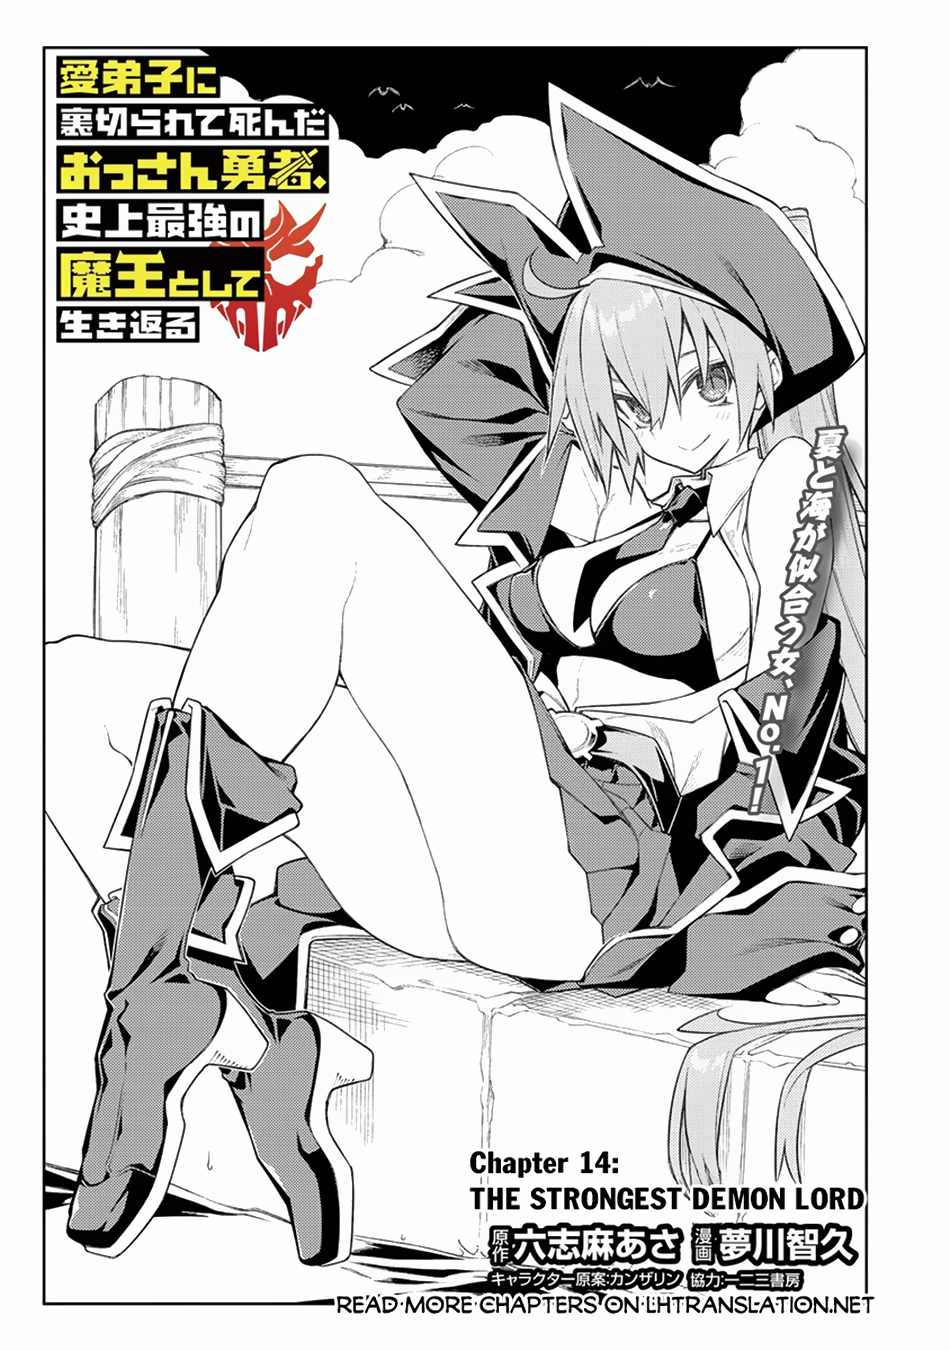 The Betrayed Hero Who Was Reincarnated as the Strongest Demon Lord Chapter 14-eng-li - Page 1